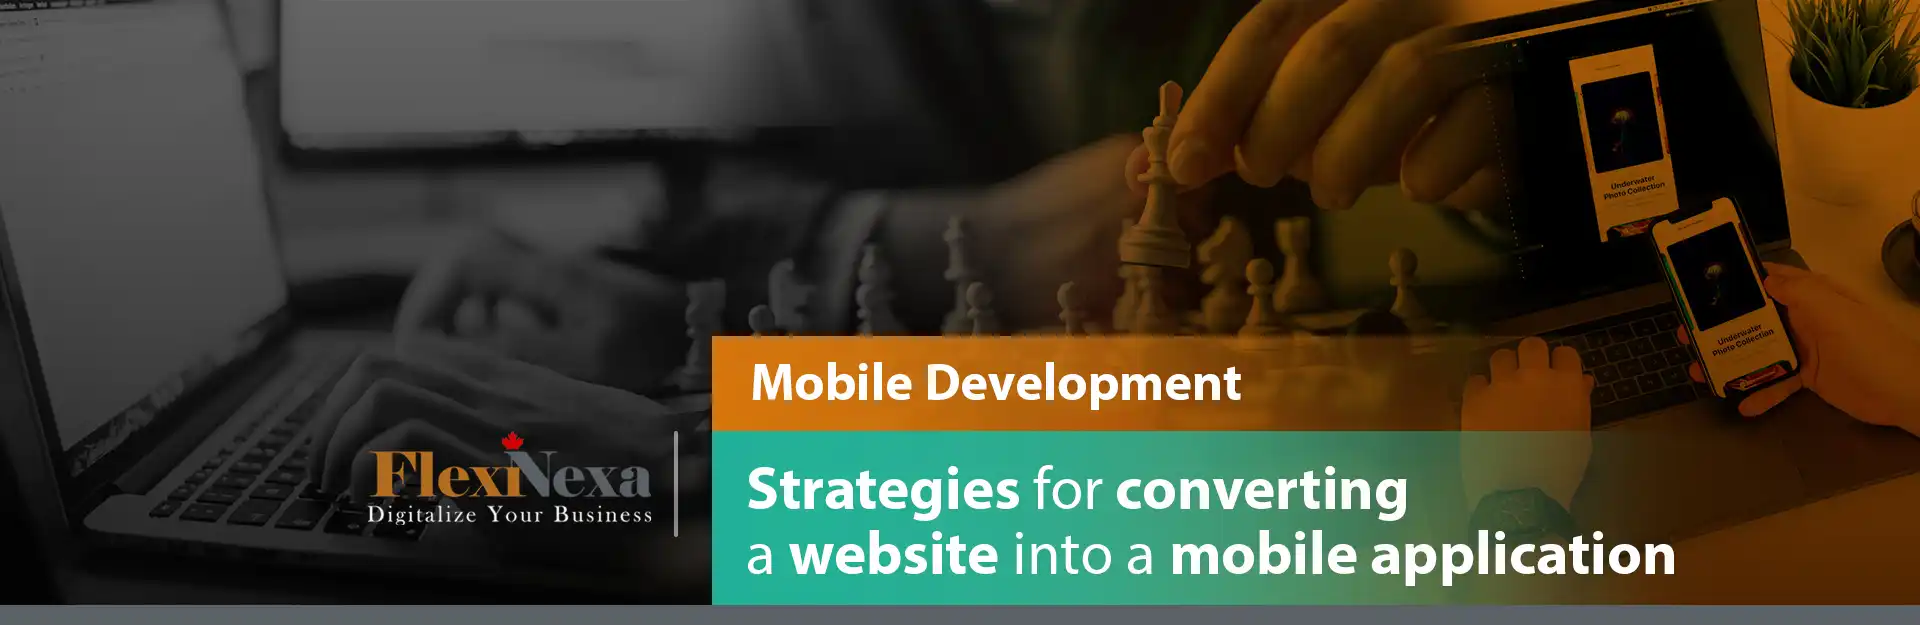 Strategies for converting a website to a mobile application